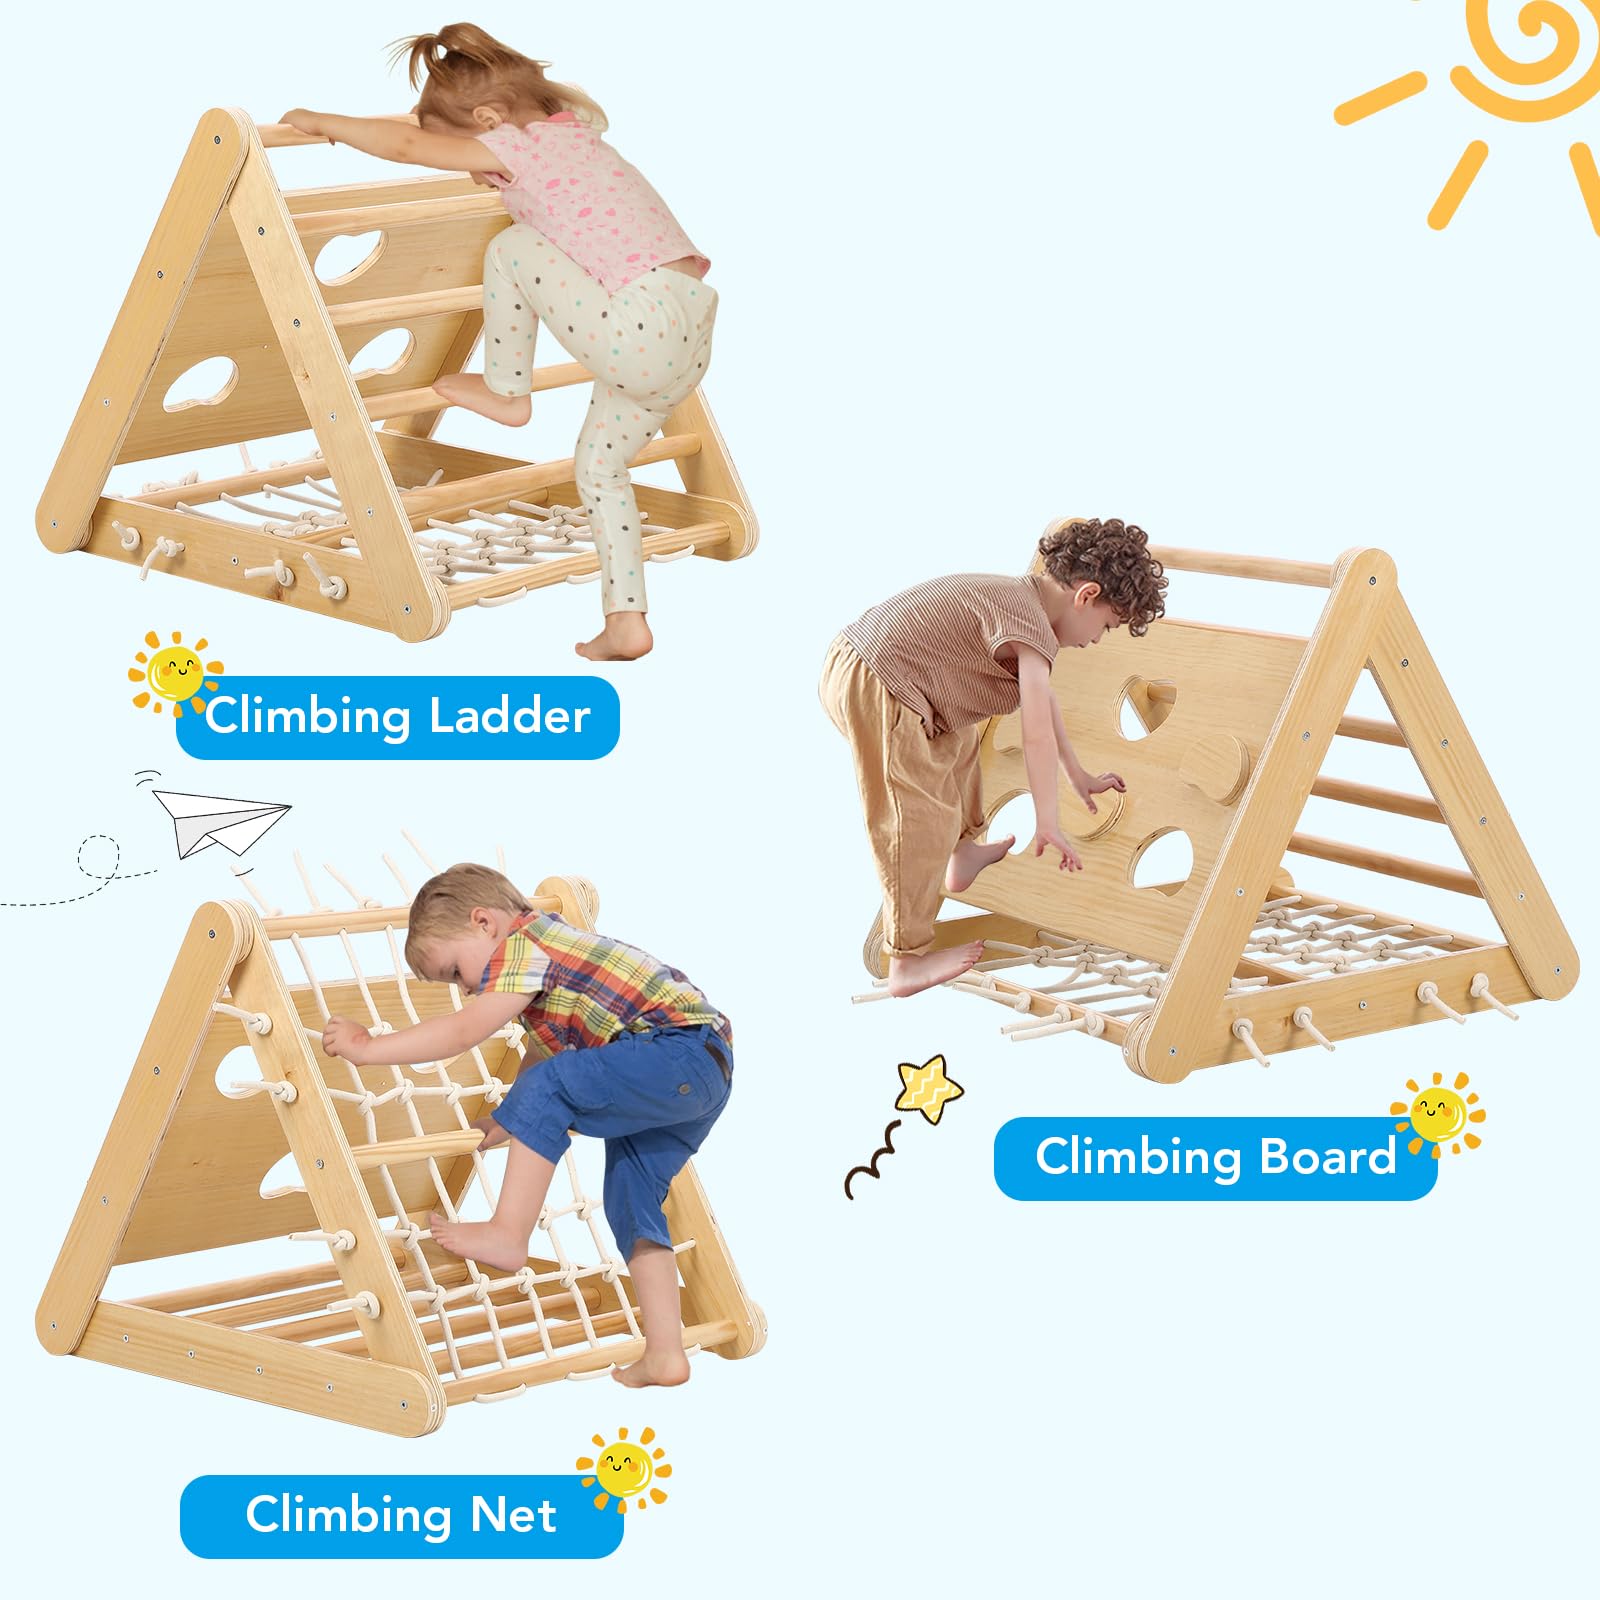 Toddler Indoor Gym Playset, 3in1 Wooden Climbing Toys, 3-Sided Wooden Triangle Climber with Climbing Net,Sliding Ramp, Sandbags & Board for Boys Girls Gift,Home & Daycare